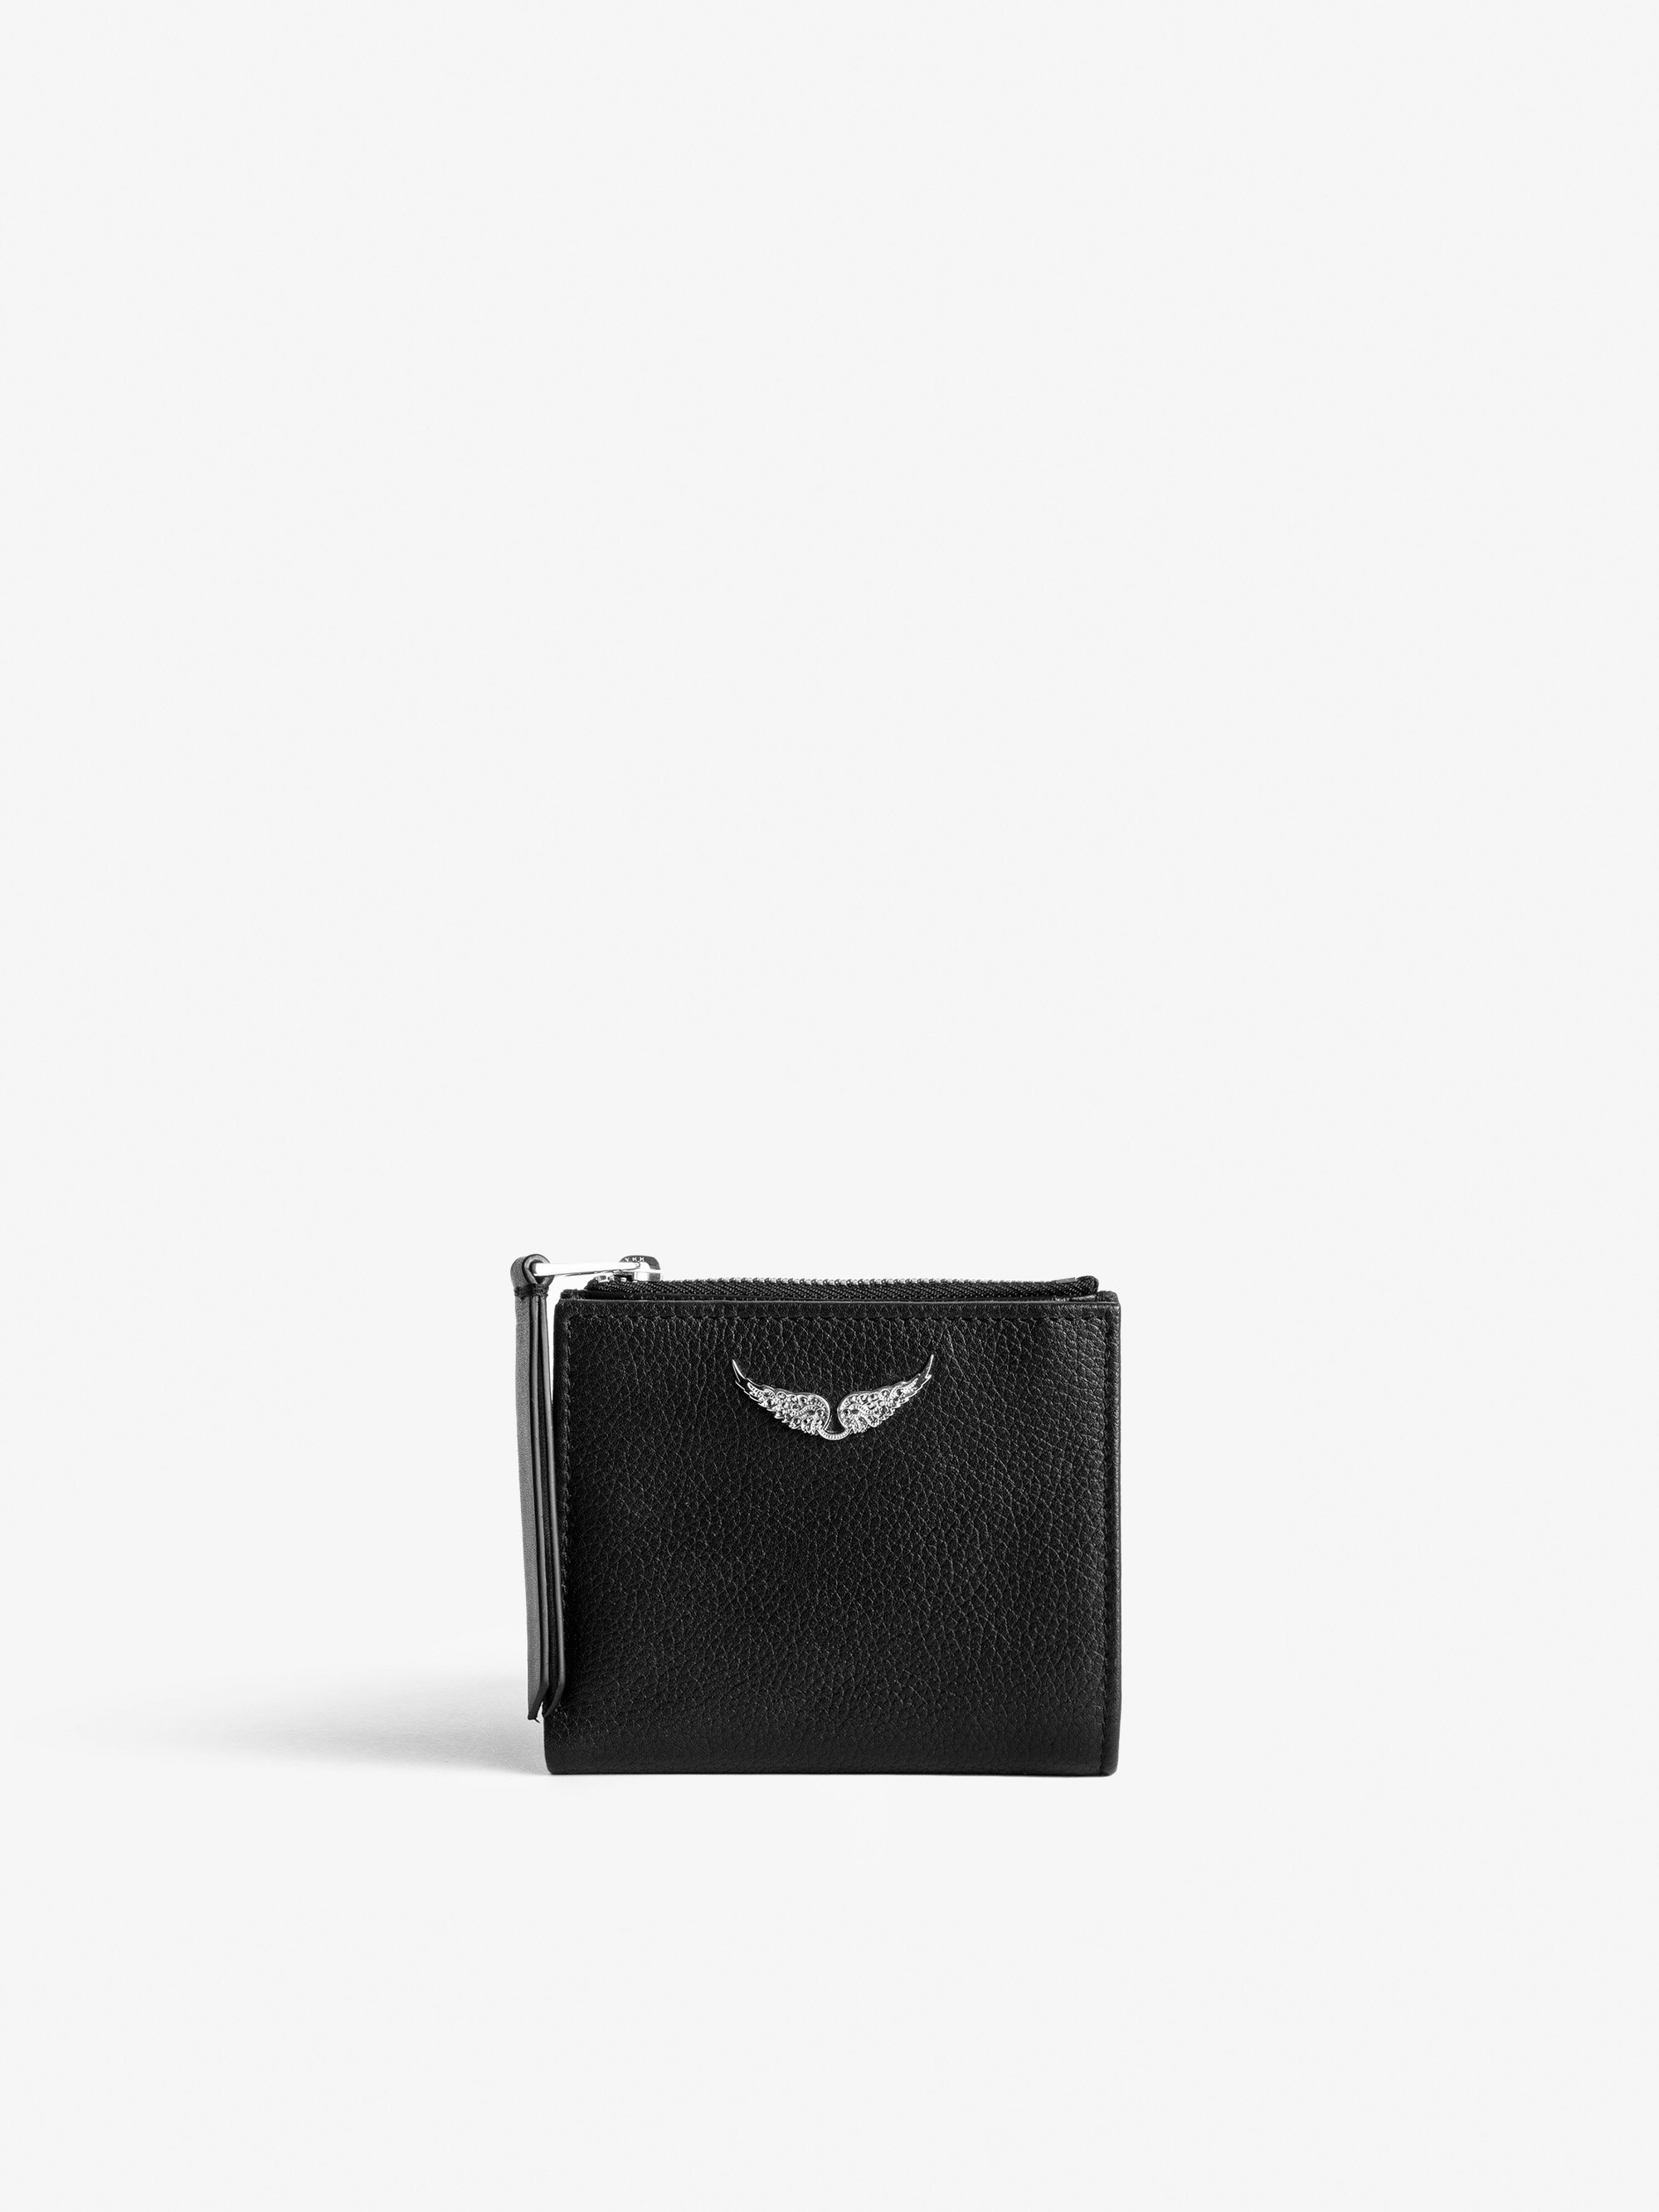 ZV Fold Coin Purse - Black grained leather coin purse